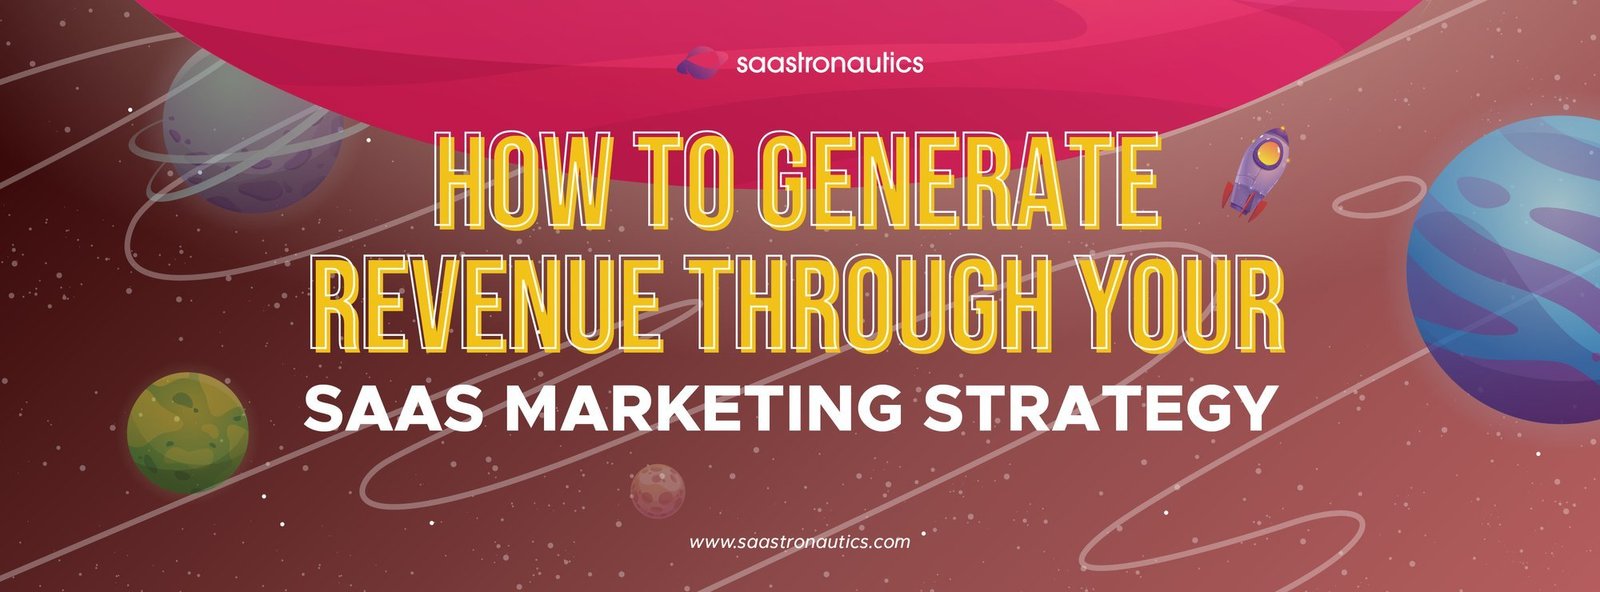 How To Generate Revenue Through Your SaaS Marketing Strategy